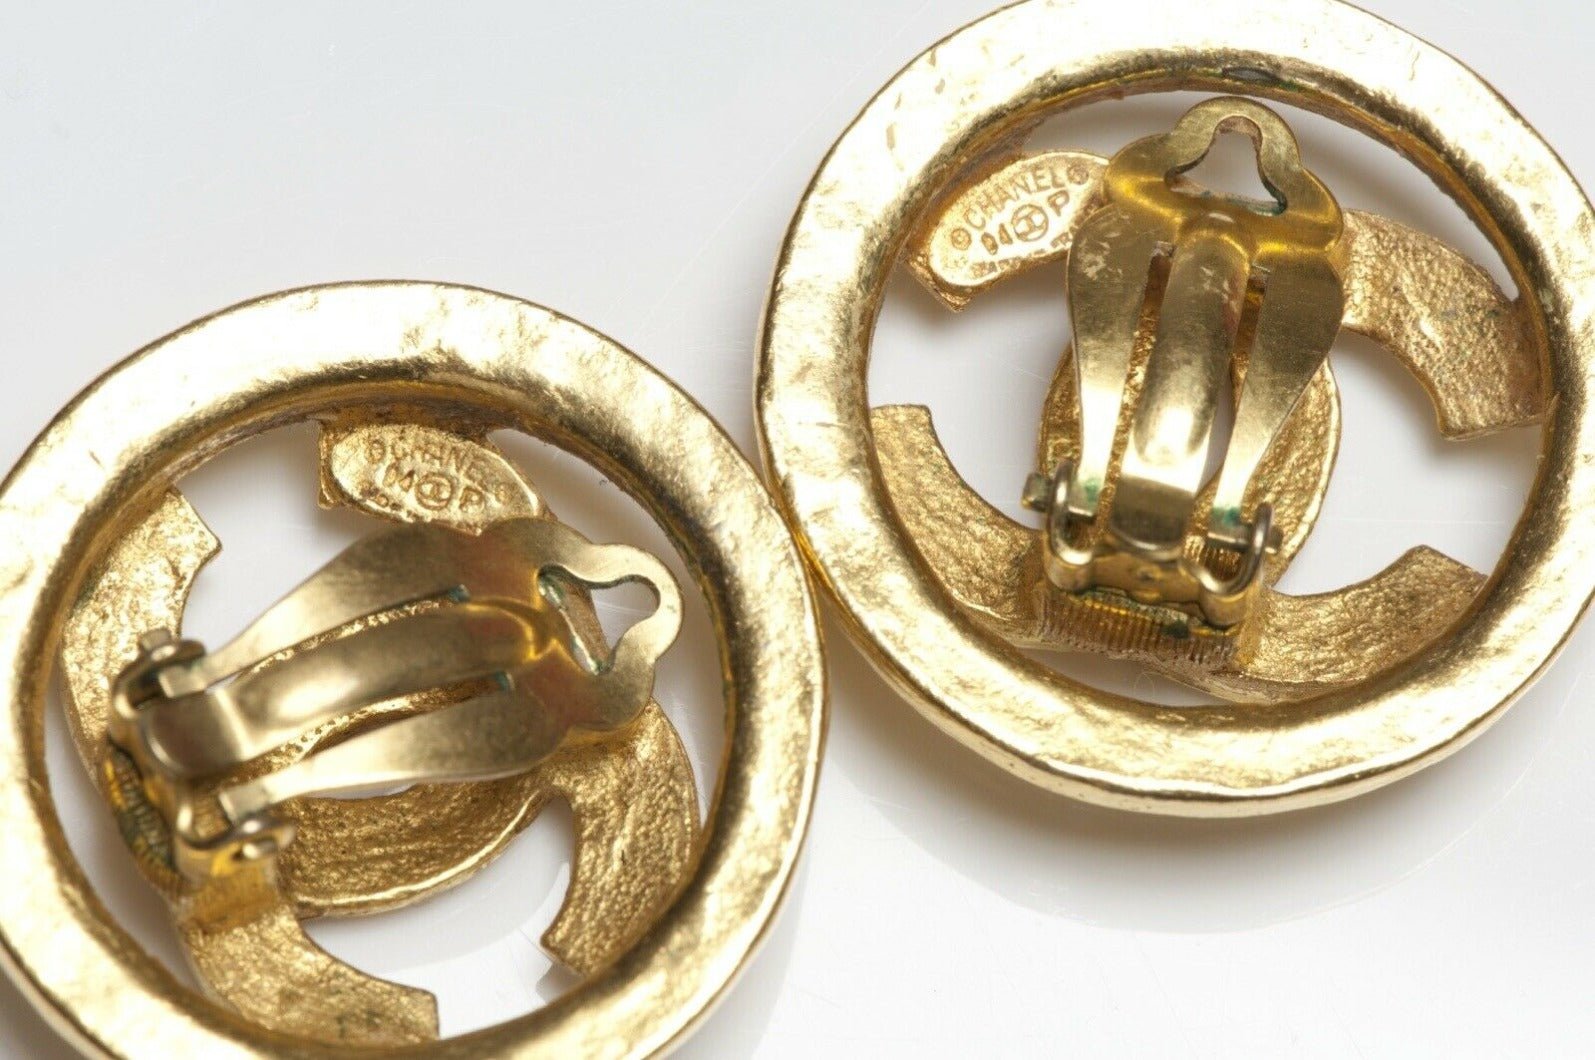 CHANEL Paris Spring 1994 Gold Plated CC Round Earrings